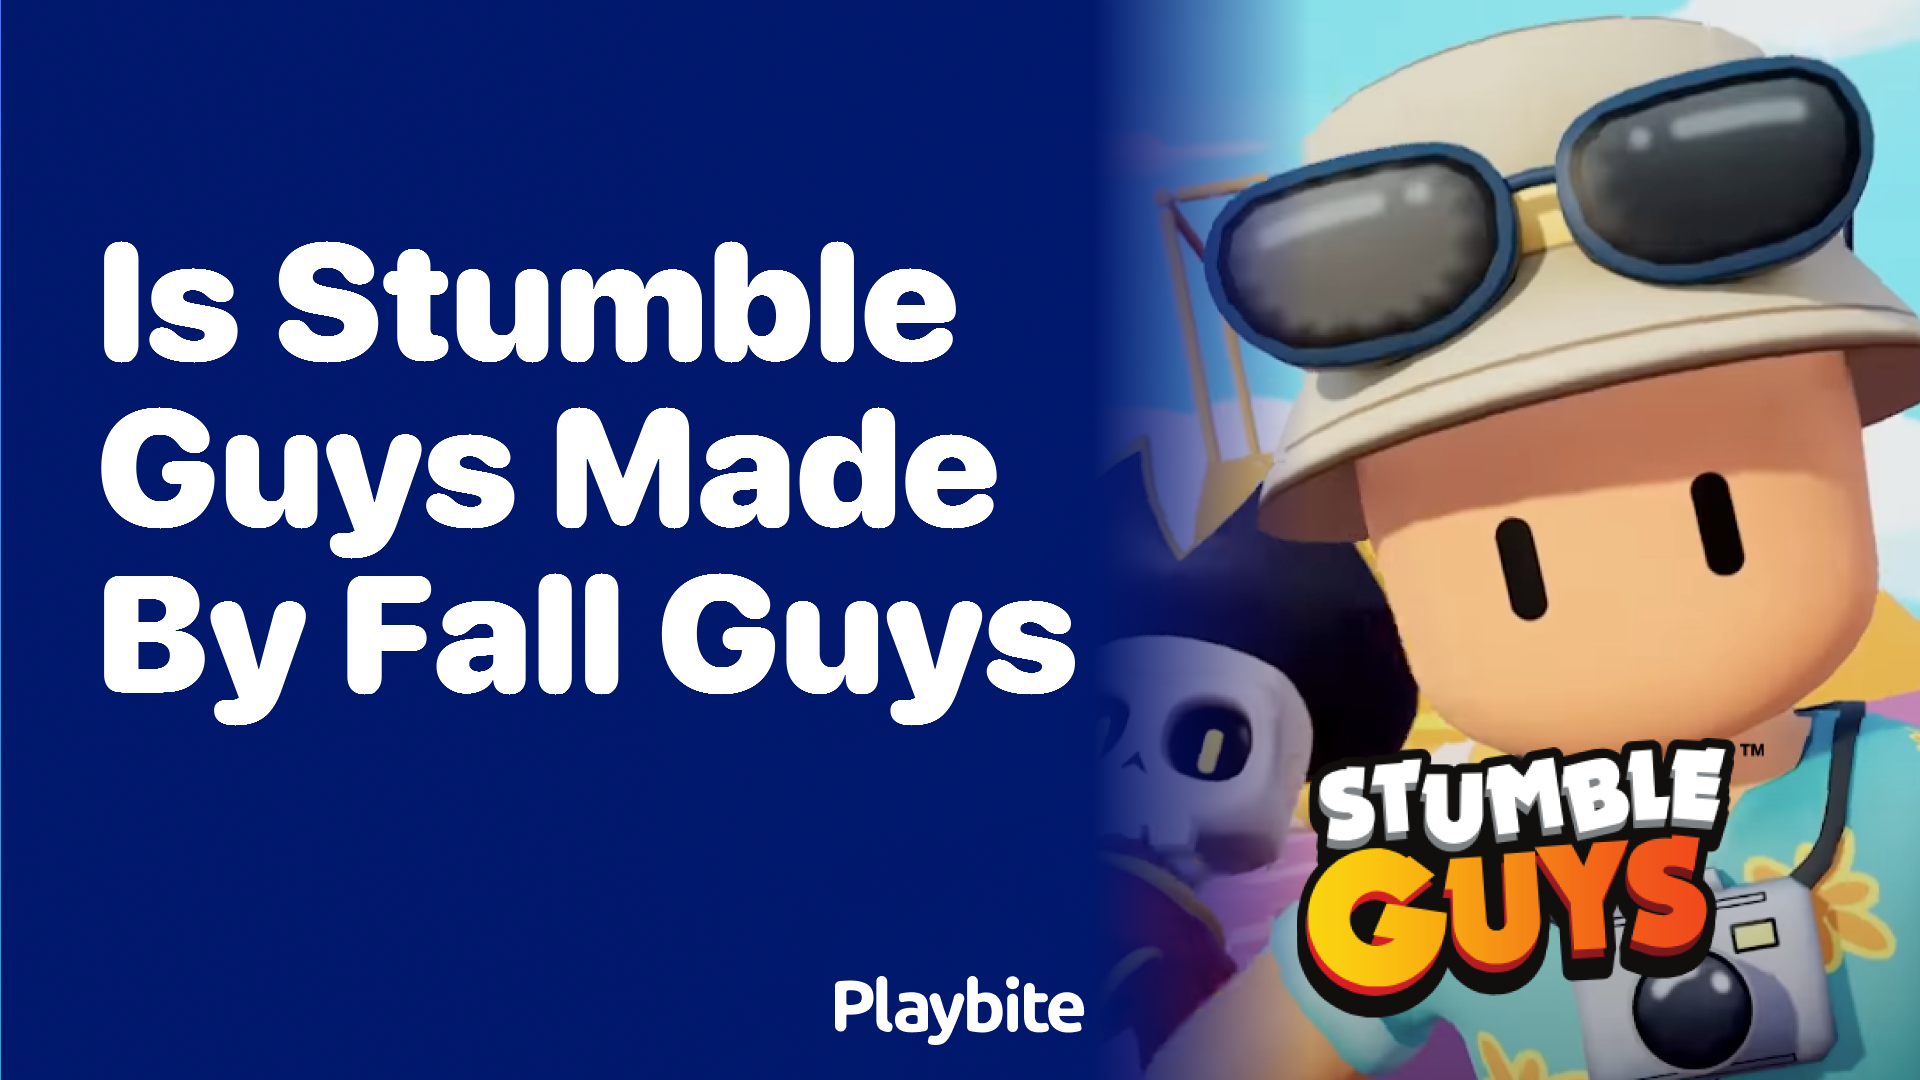 Is Stumble Guys Made by Fall Guys? Exploring the Truth